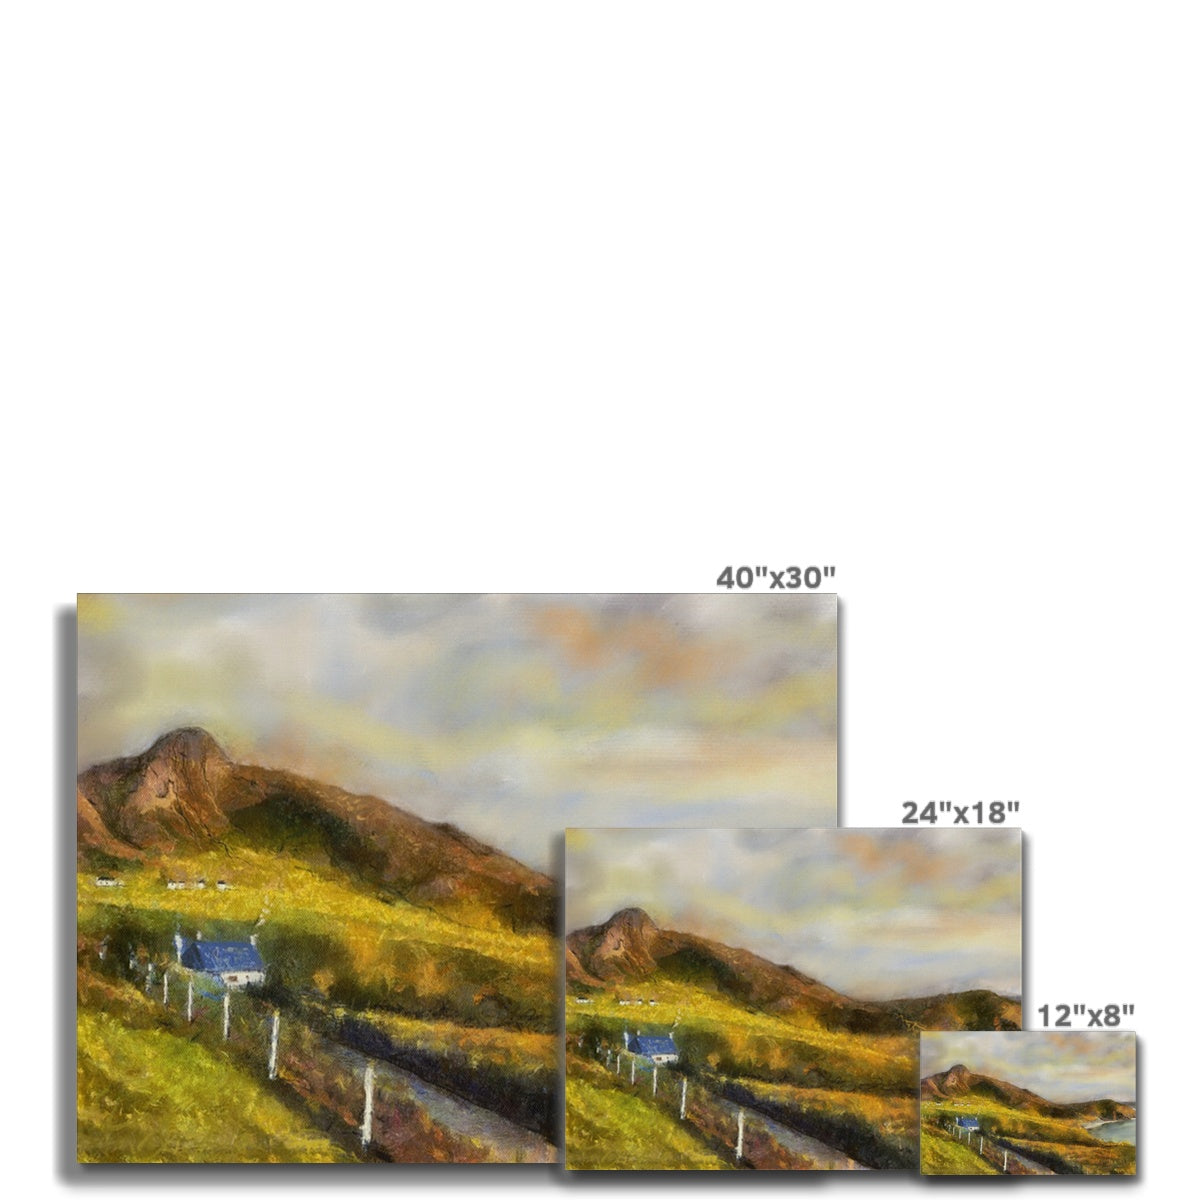 Coldbackie Painting | Canvas From Scotland-Contemporary Stretched Canvas Prints-Scottish Highlands & Lowlands Art Gallery-Paintings, Prints, Homeware, Art Gifts From Scotland By Scottish Artist Kevin Hunter